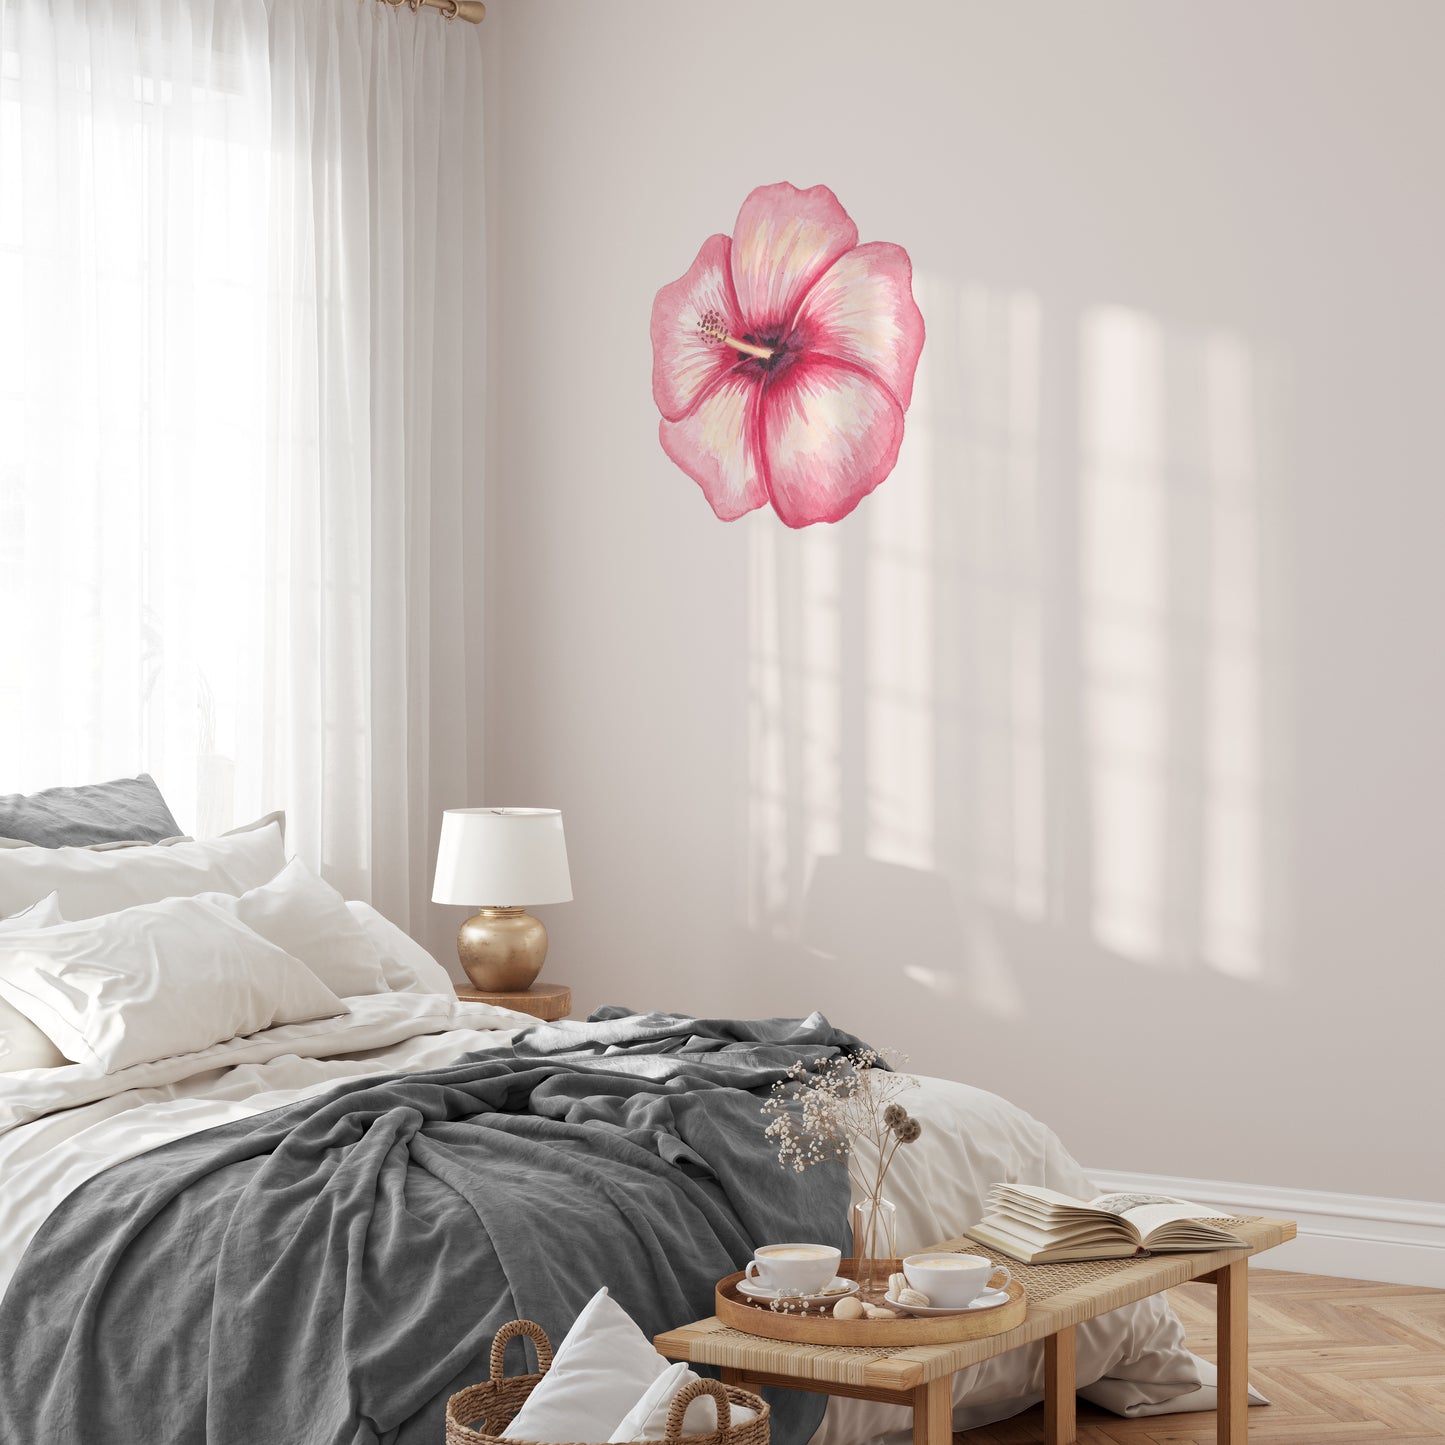 Watercolour hibiscus | Fabric wall stickers